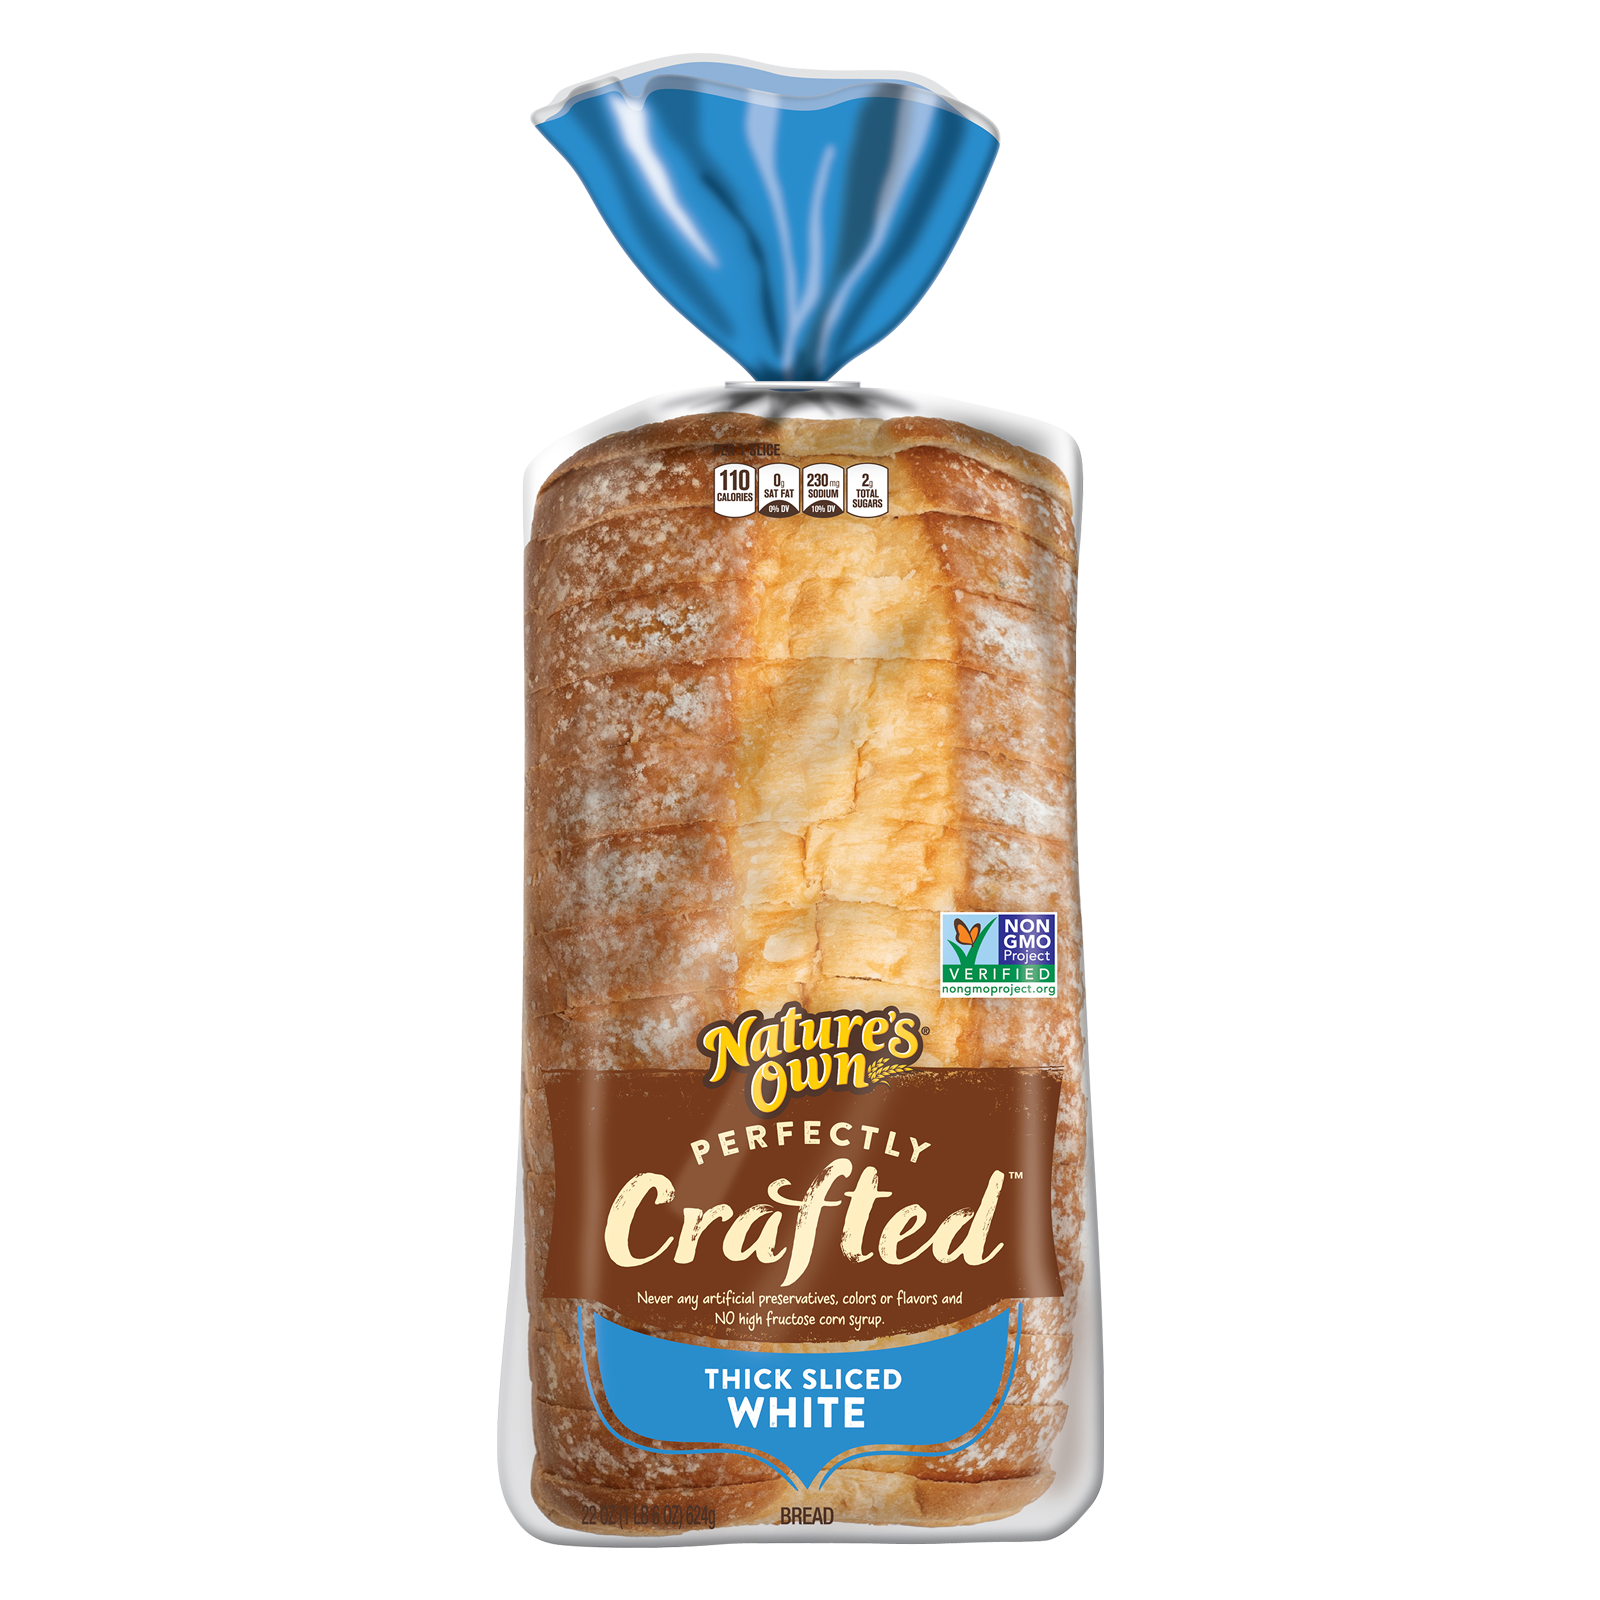 Nature's Own Perfectly Crafted White Bread - 22oz